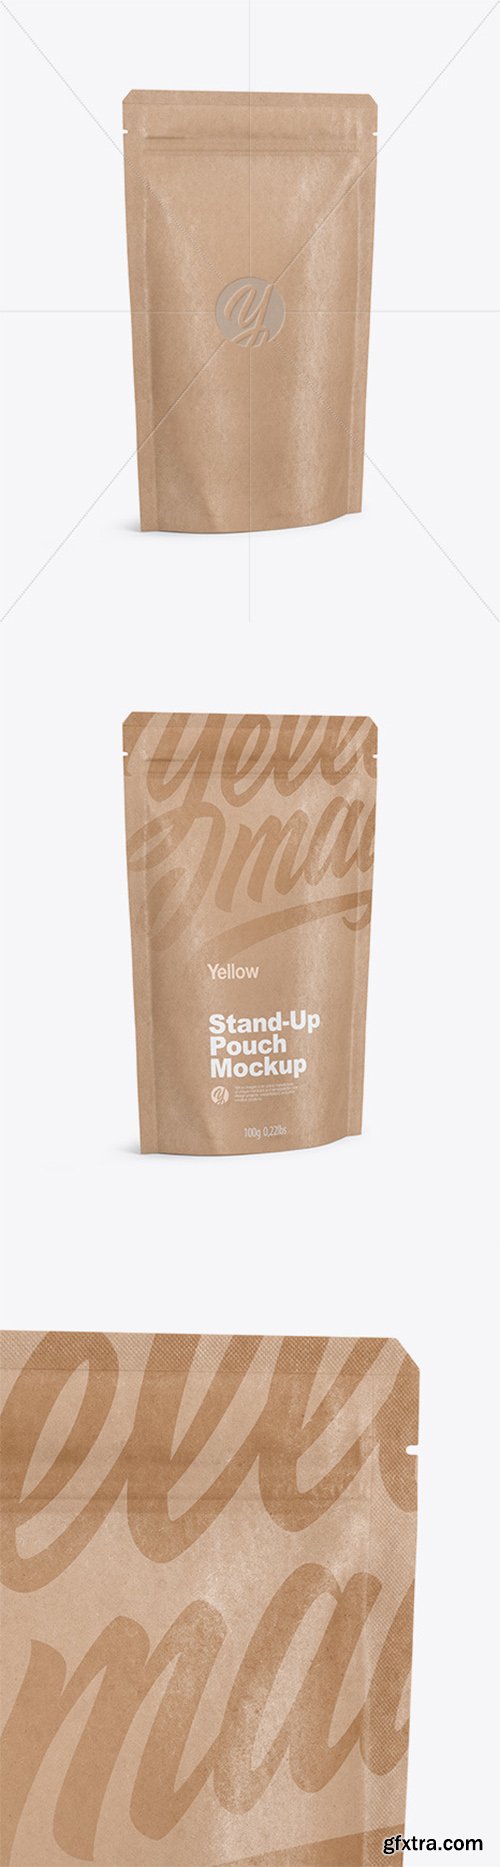 Kraft Stand Up Pouch with Zipper Mockup - Half Side View 51174